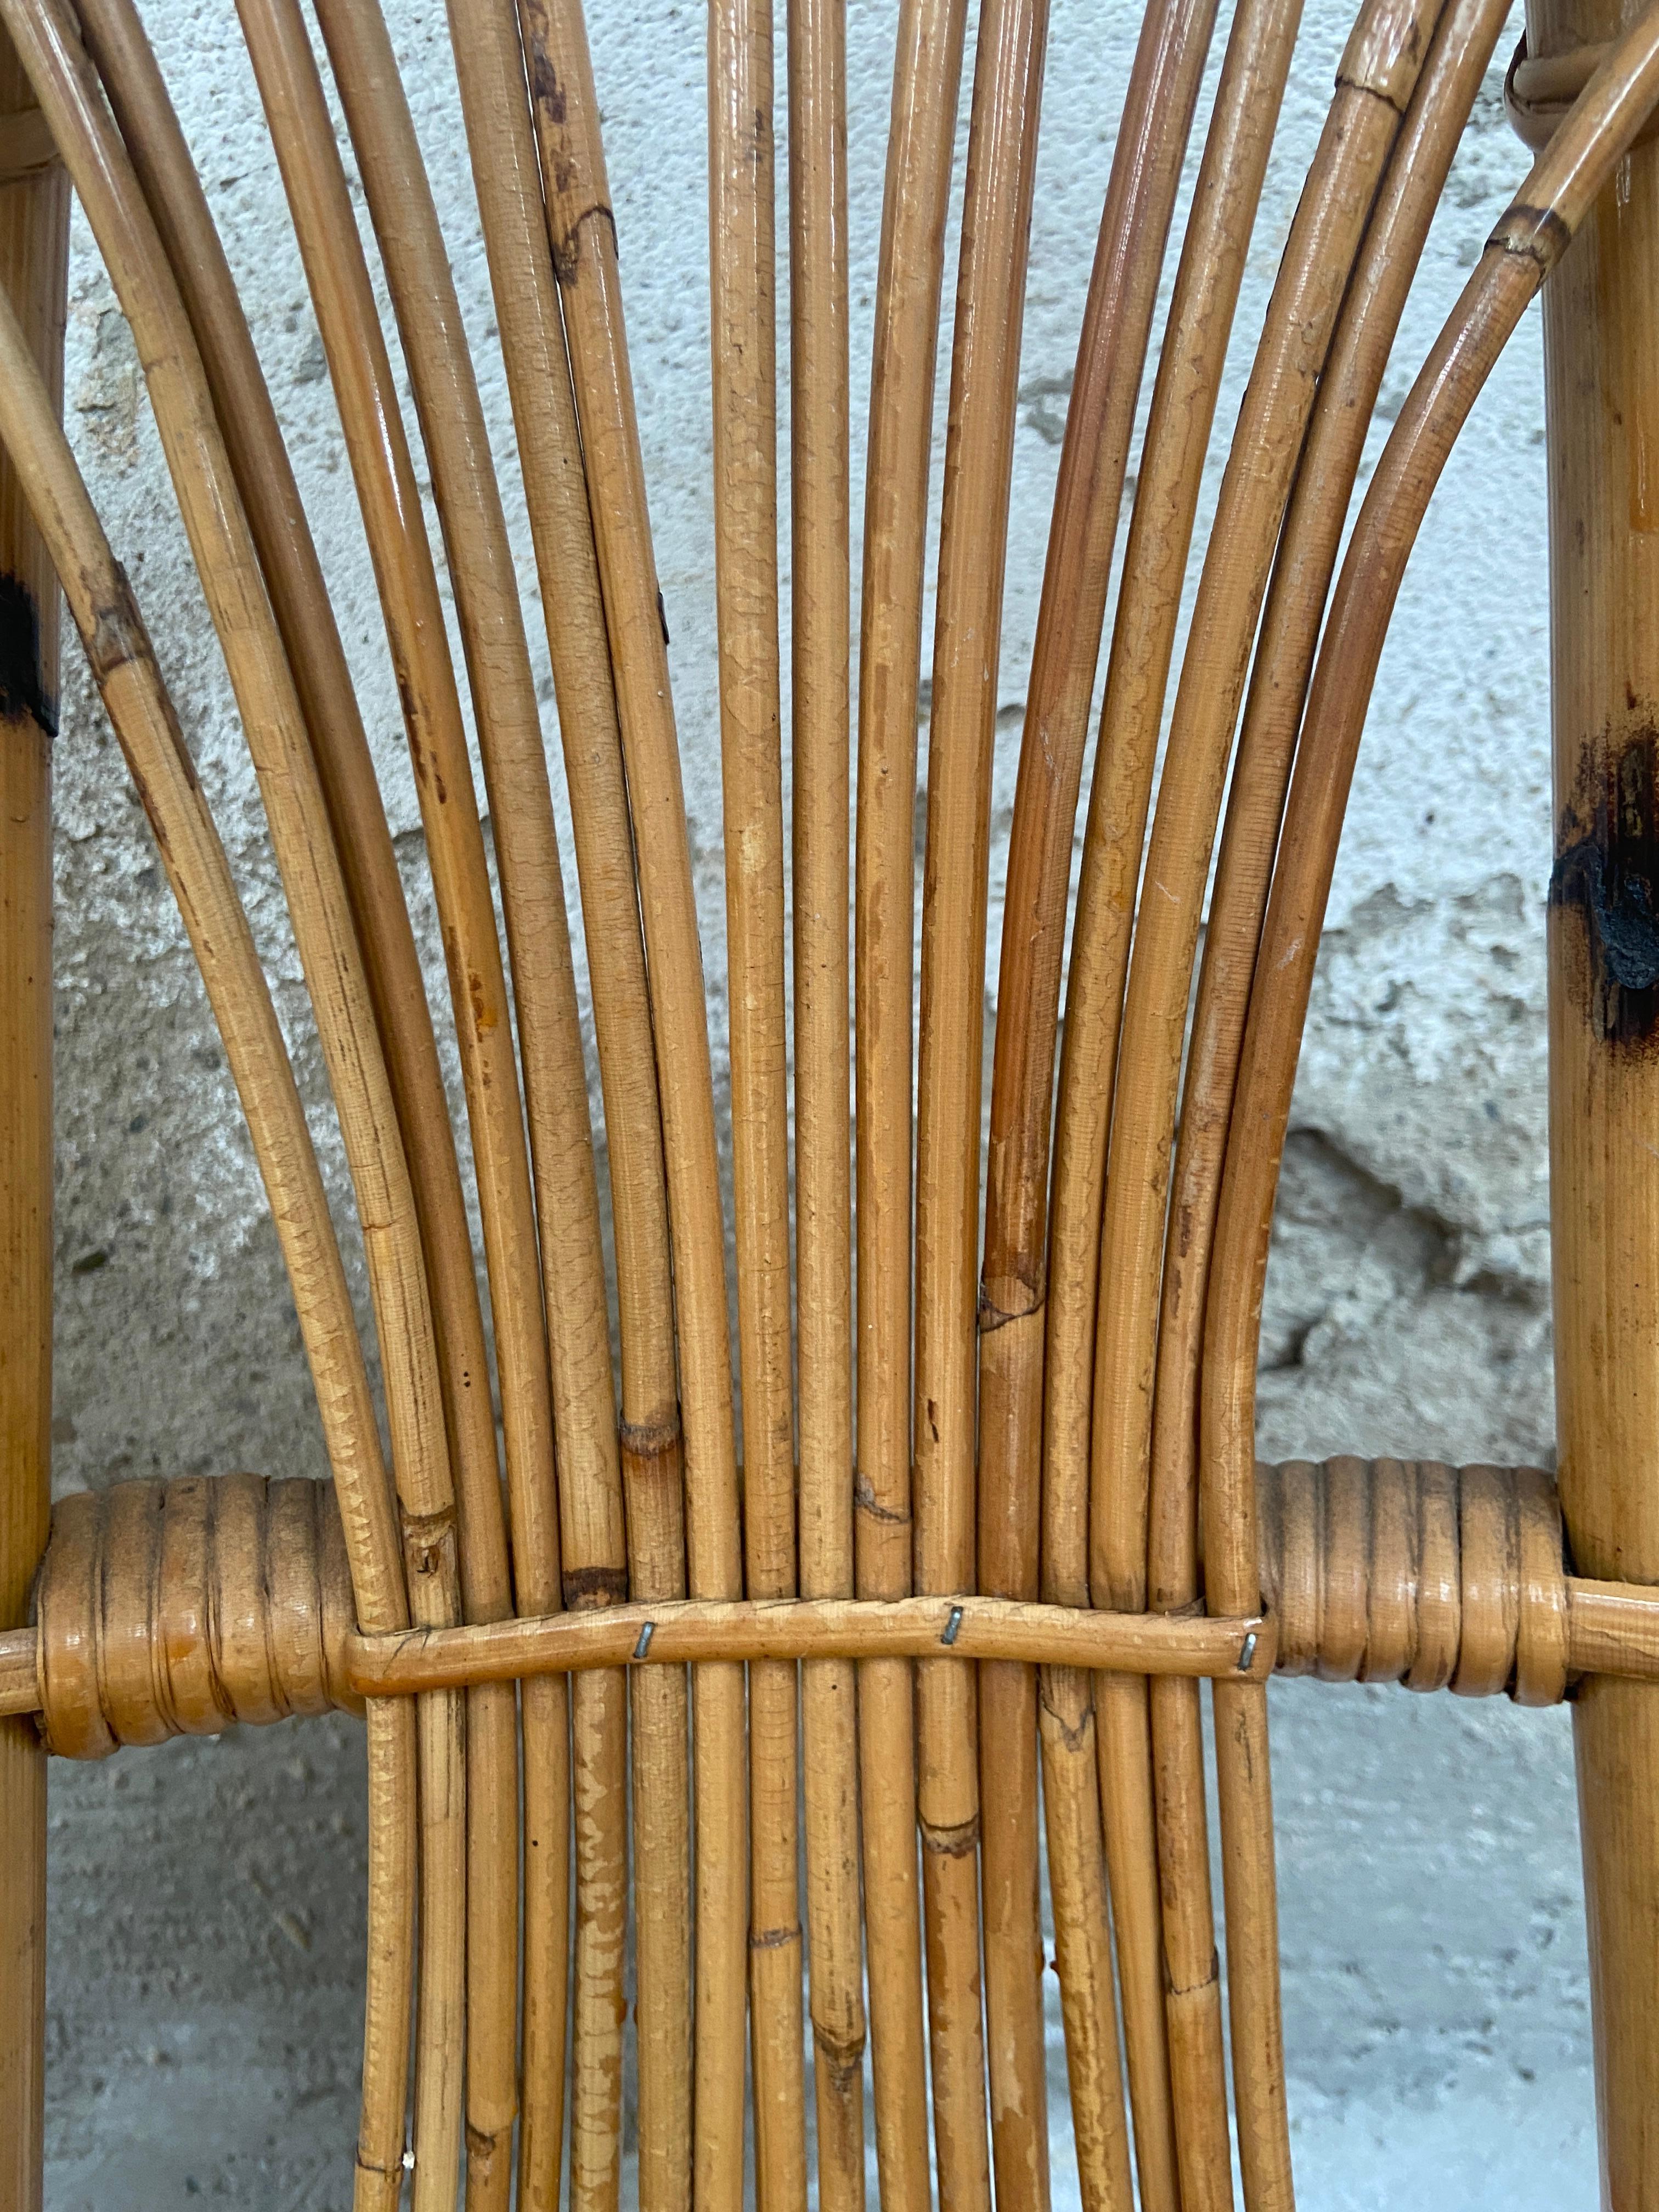 Mid-Century Modern Set of 4 Bamboo Chairs from the French Riviera, 1970s For Sale 11